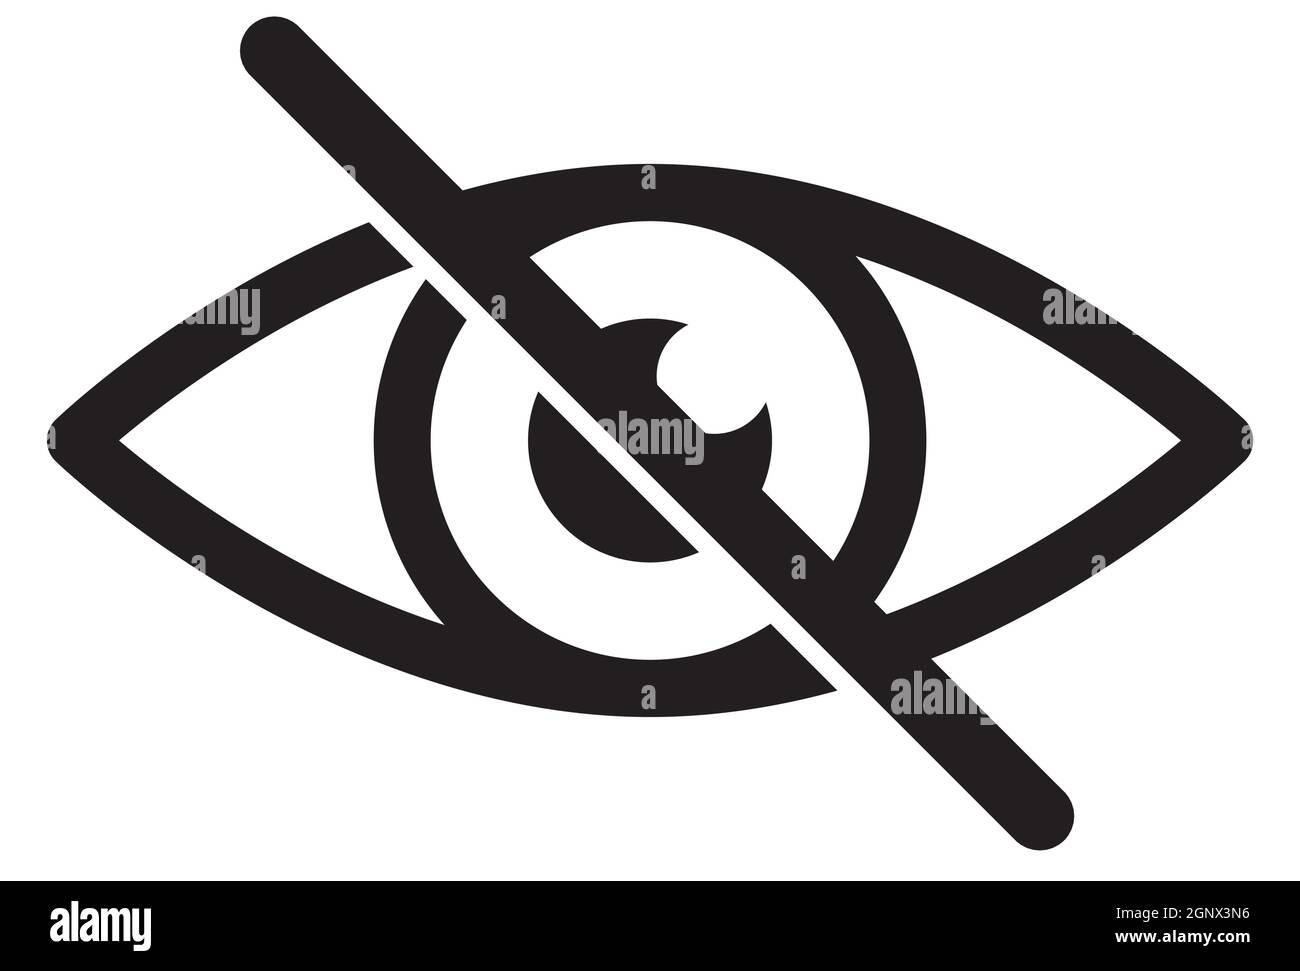 No eye. Black crossed eyeball icon. Concept of avoid look at hidden confidential secret like password. Vector symbol isolated on white background. Stock Vector